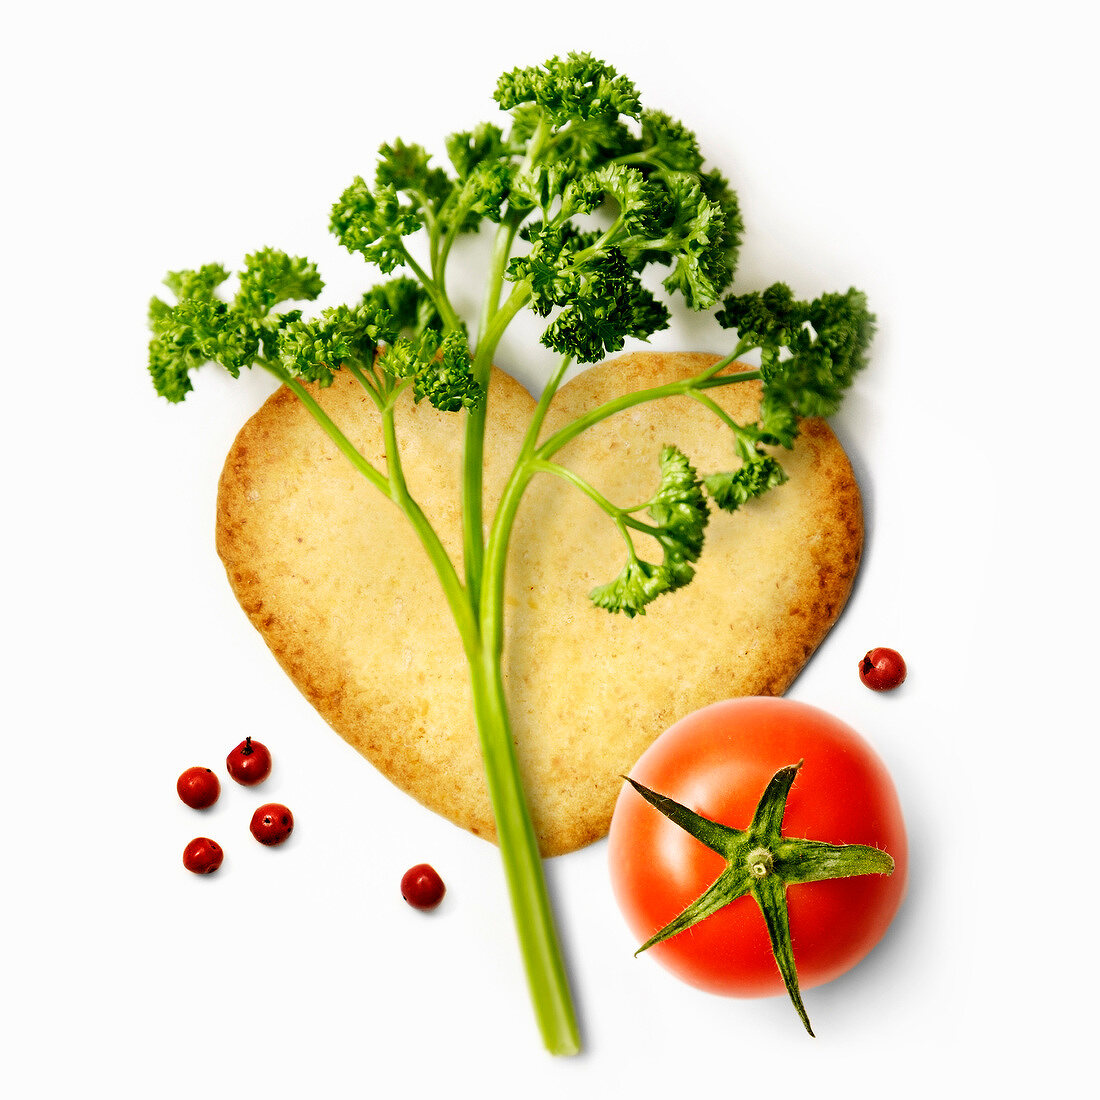 Heart-shaped biscuit with parsley,tomato and pepper